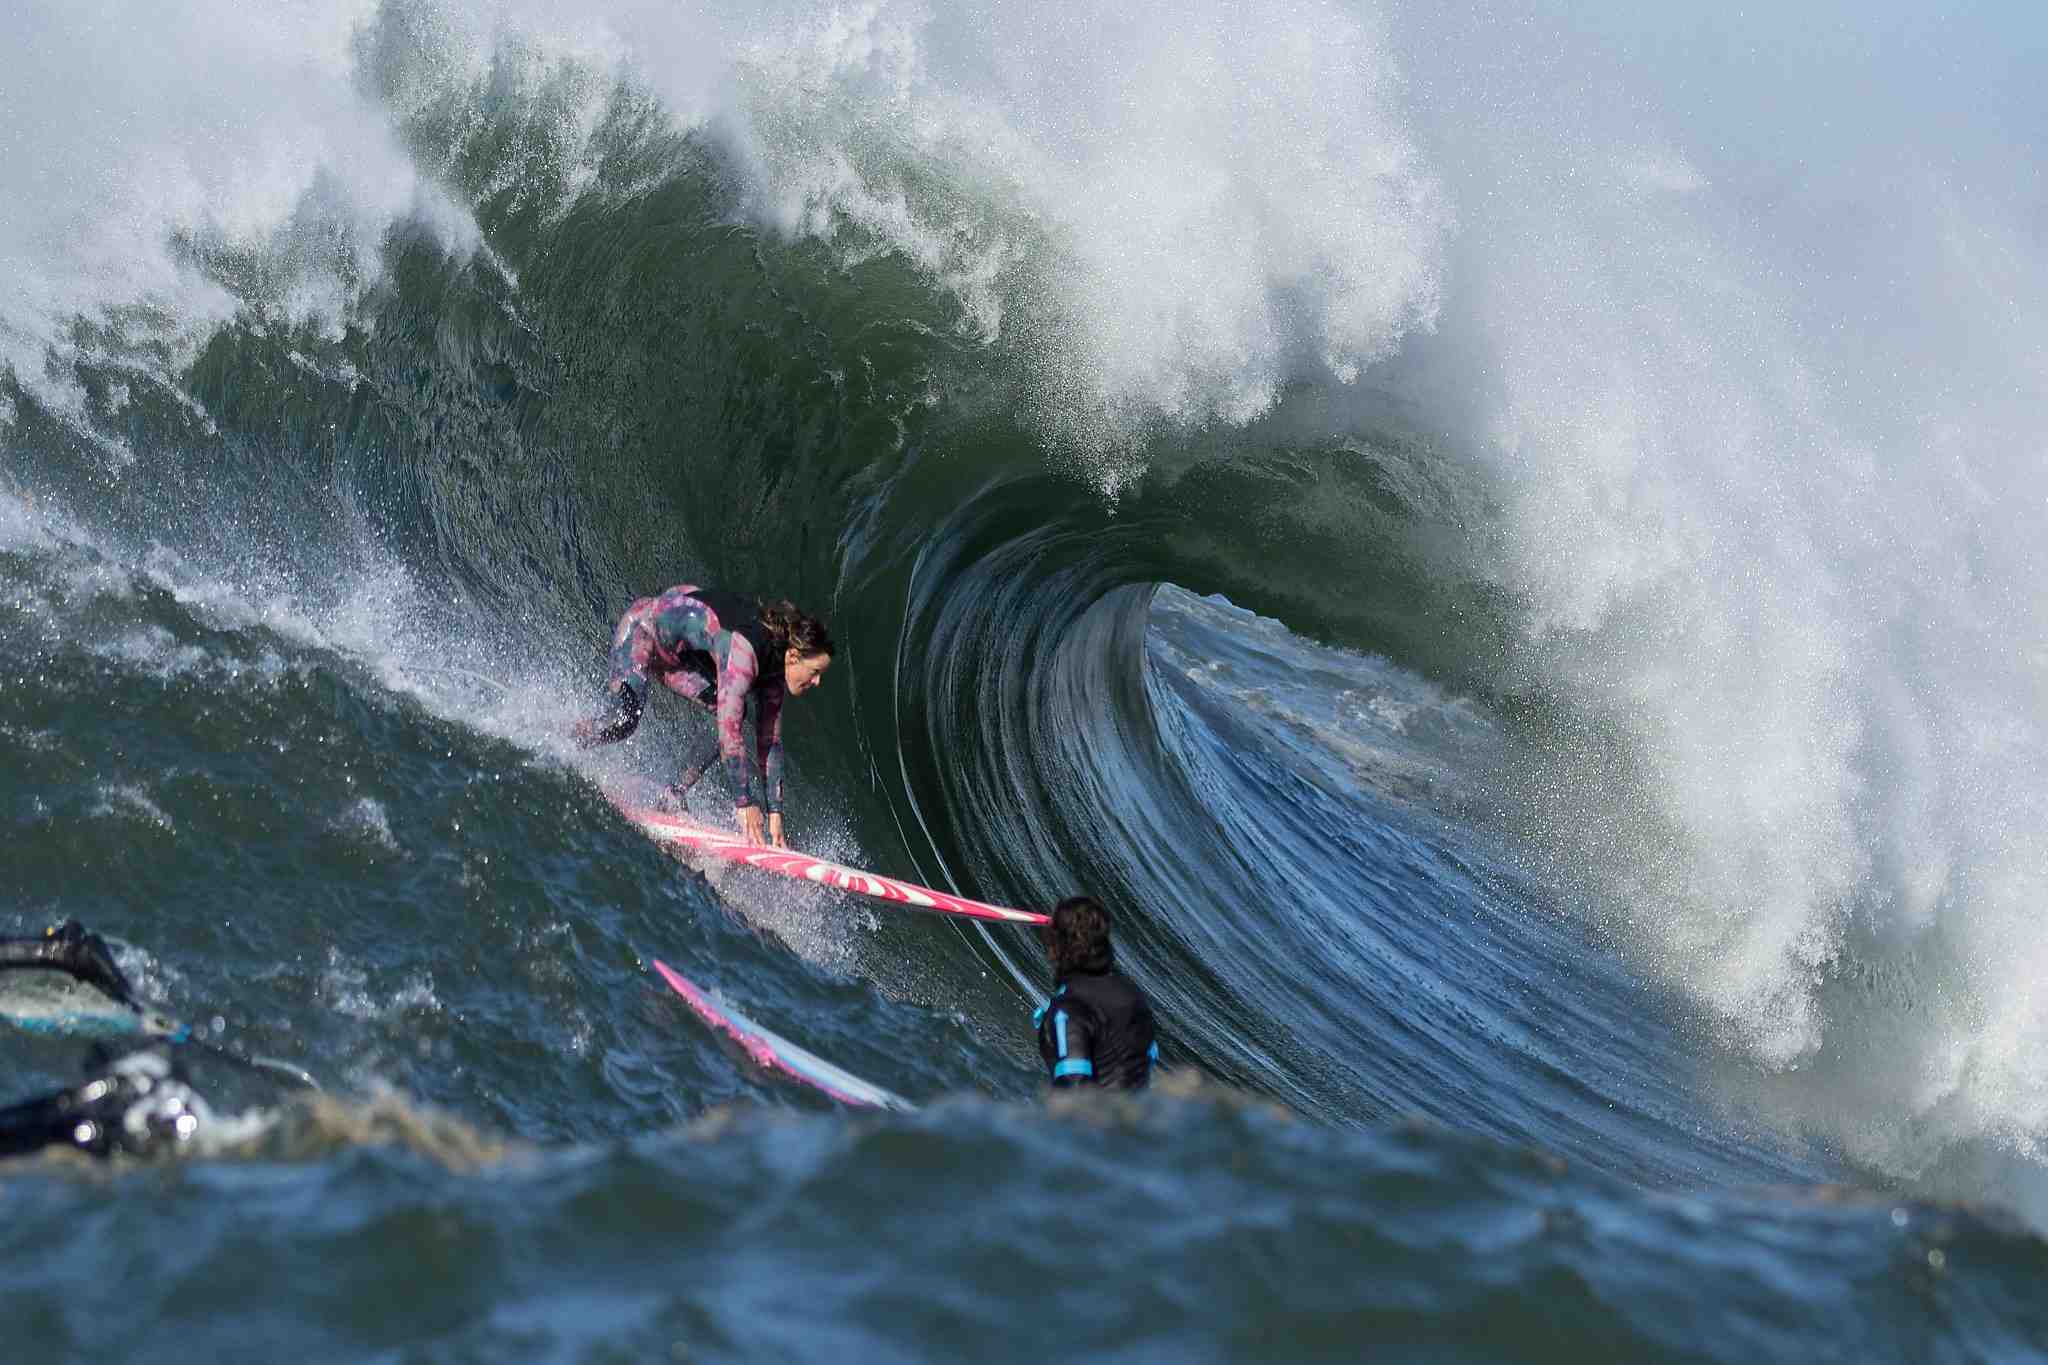 How do you get comfortable with big waves when surfing?